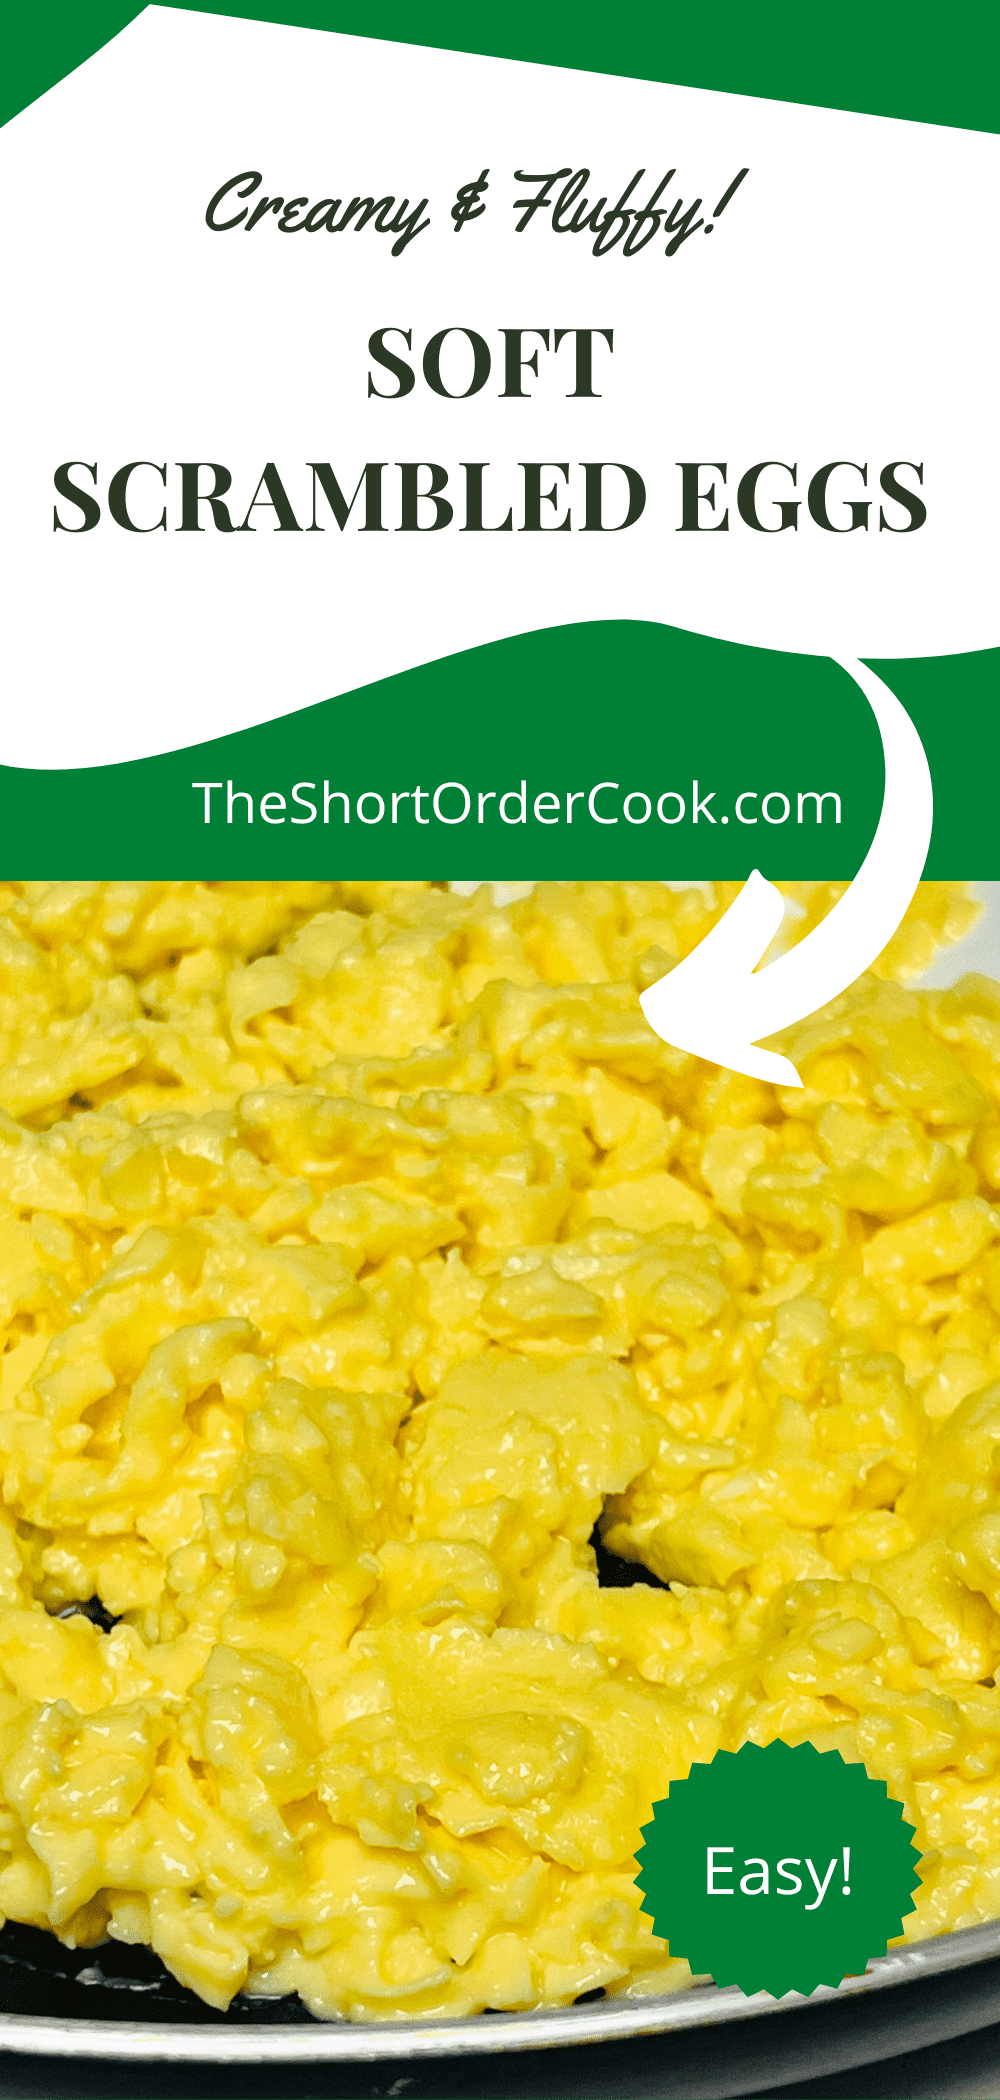 Yellow fluffy soft scrambled eggs in a skillet.